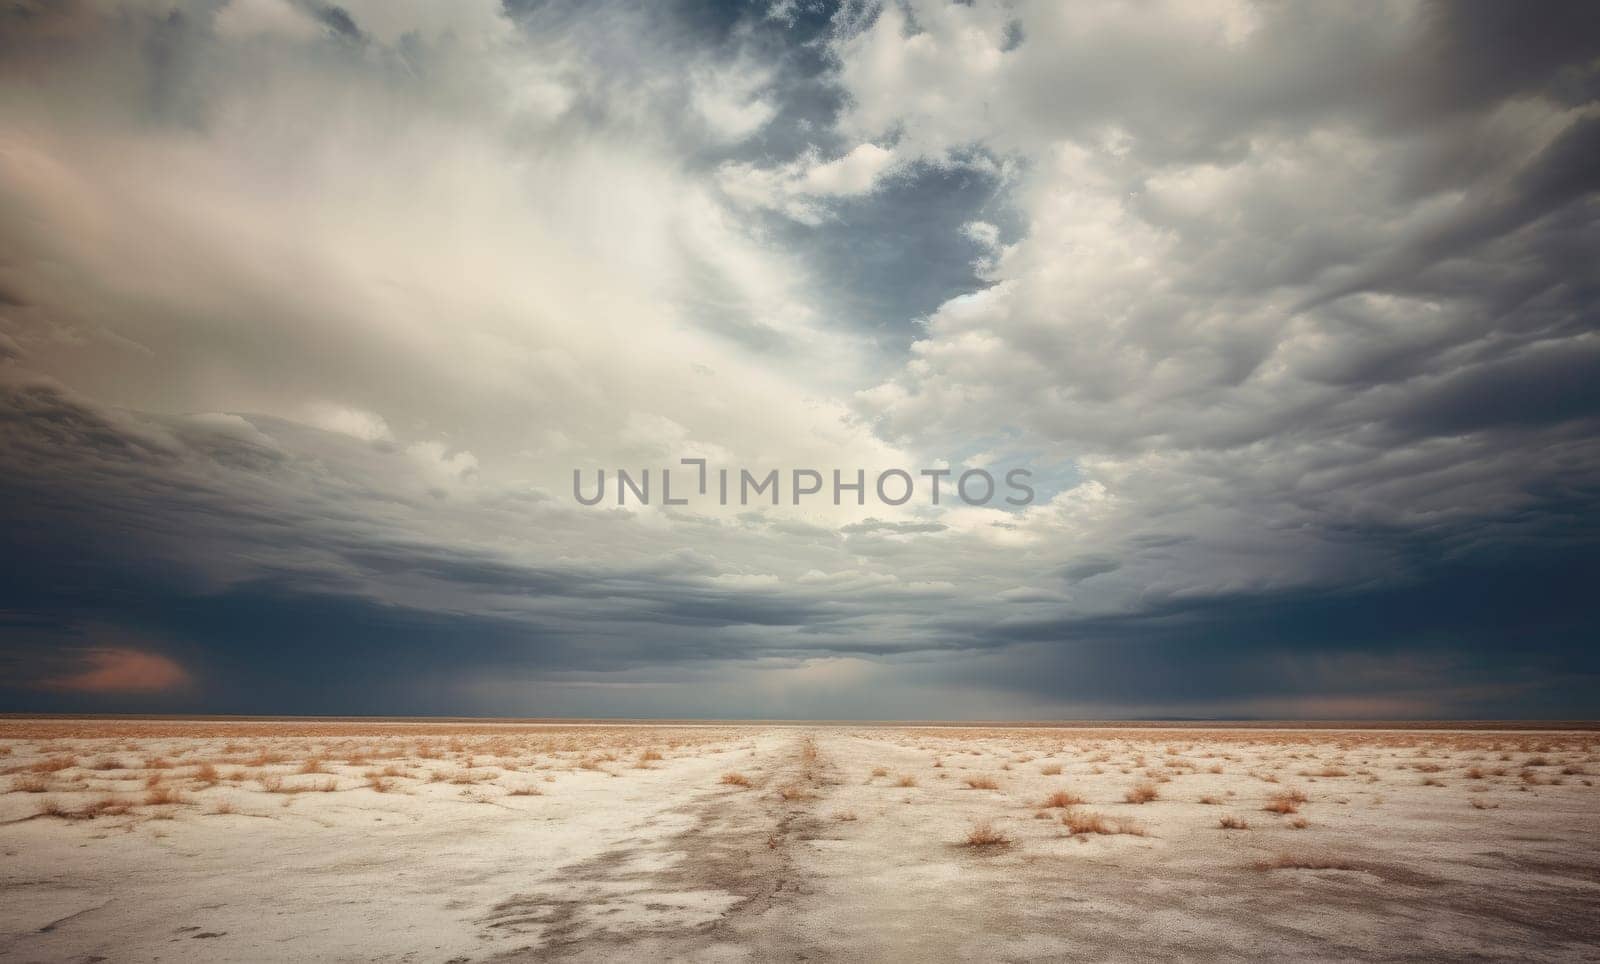 Desert and sky with clouds by cherezoff